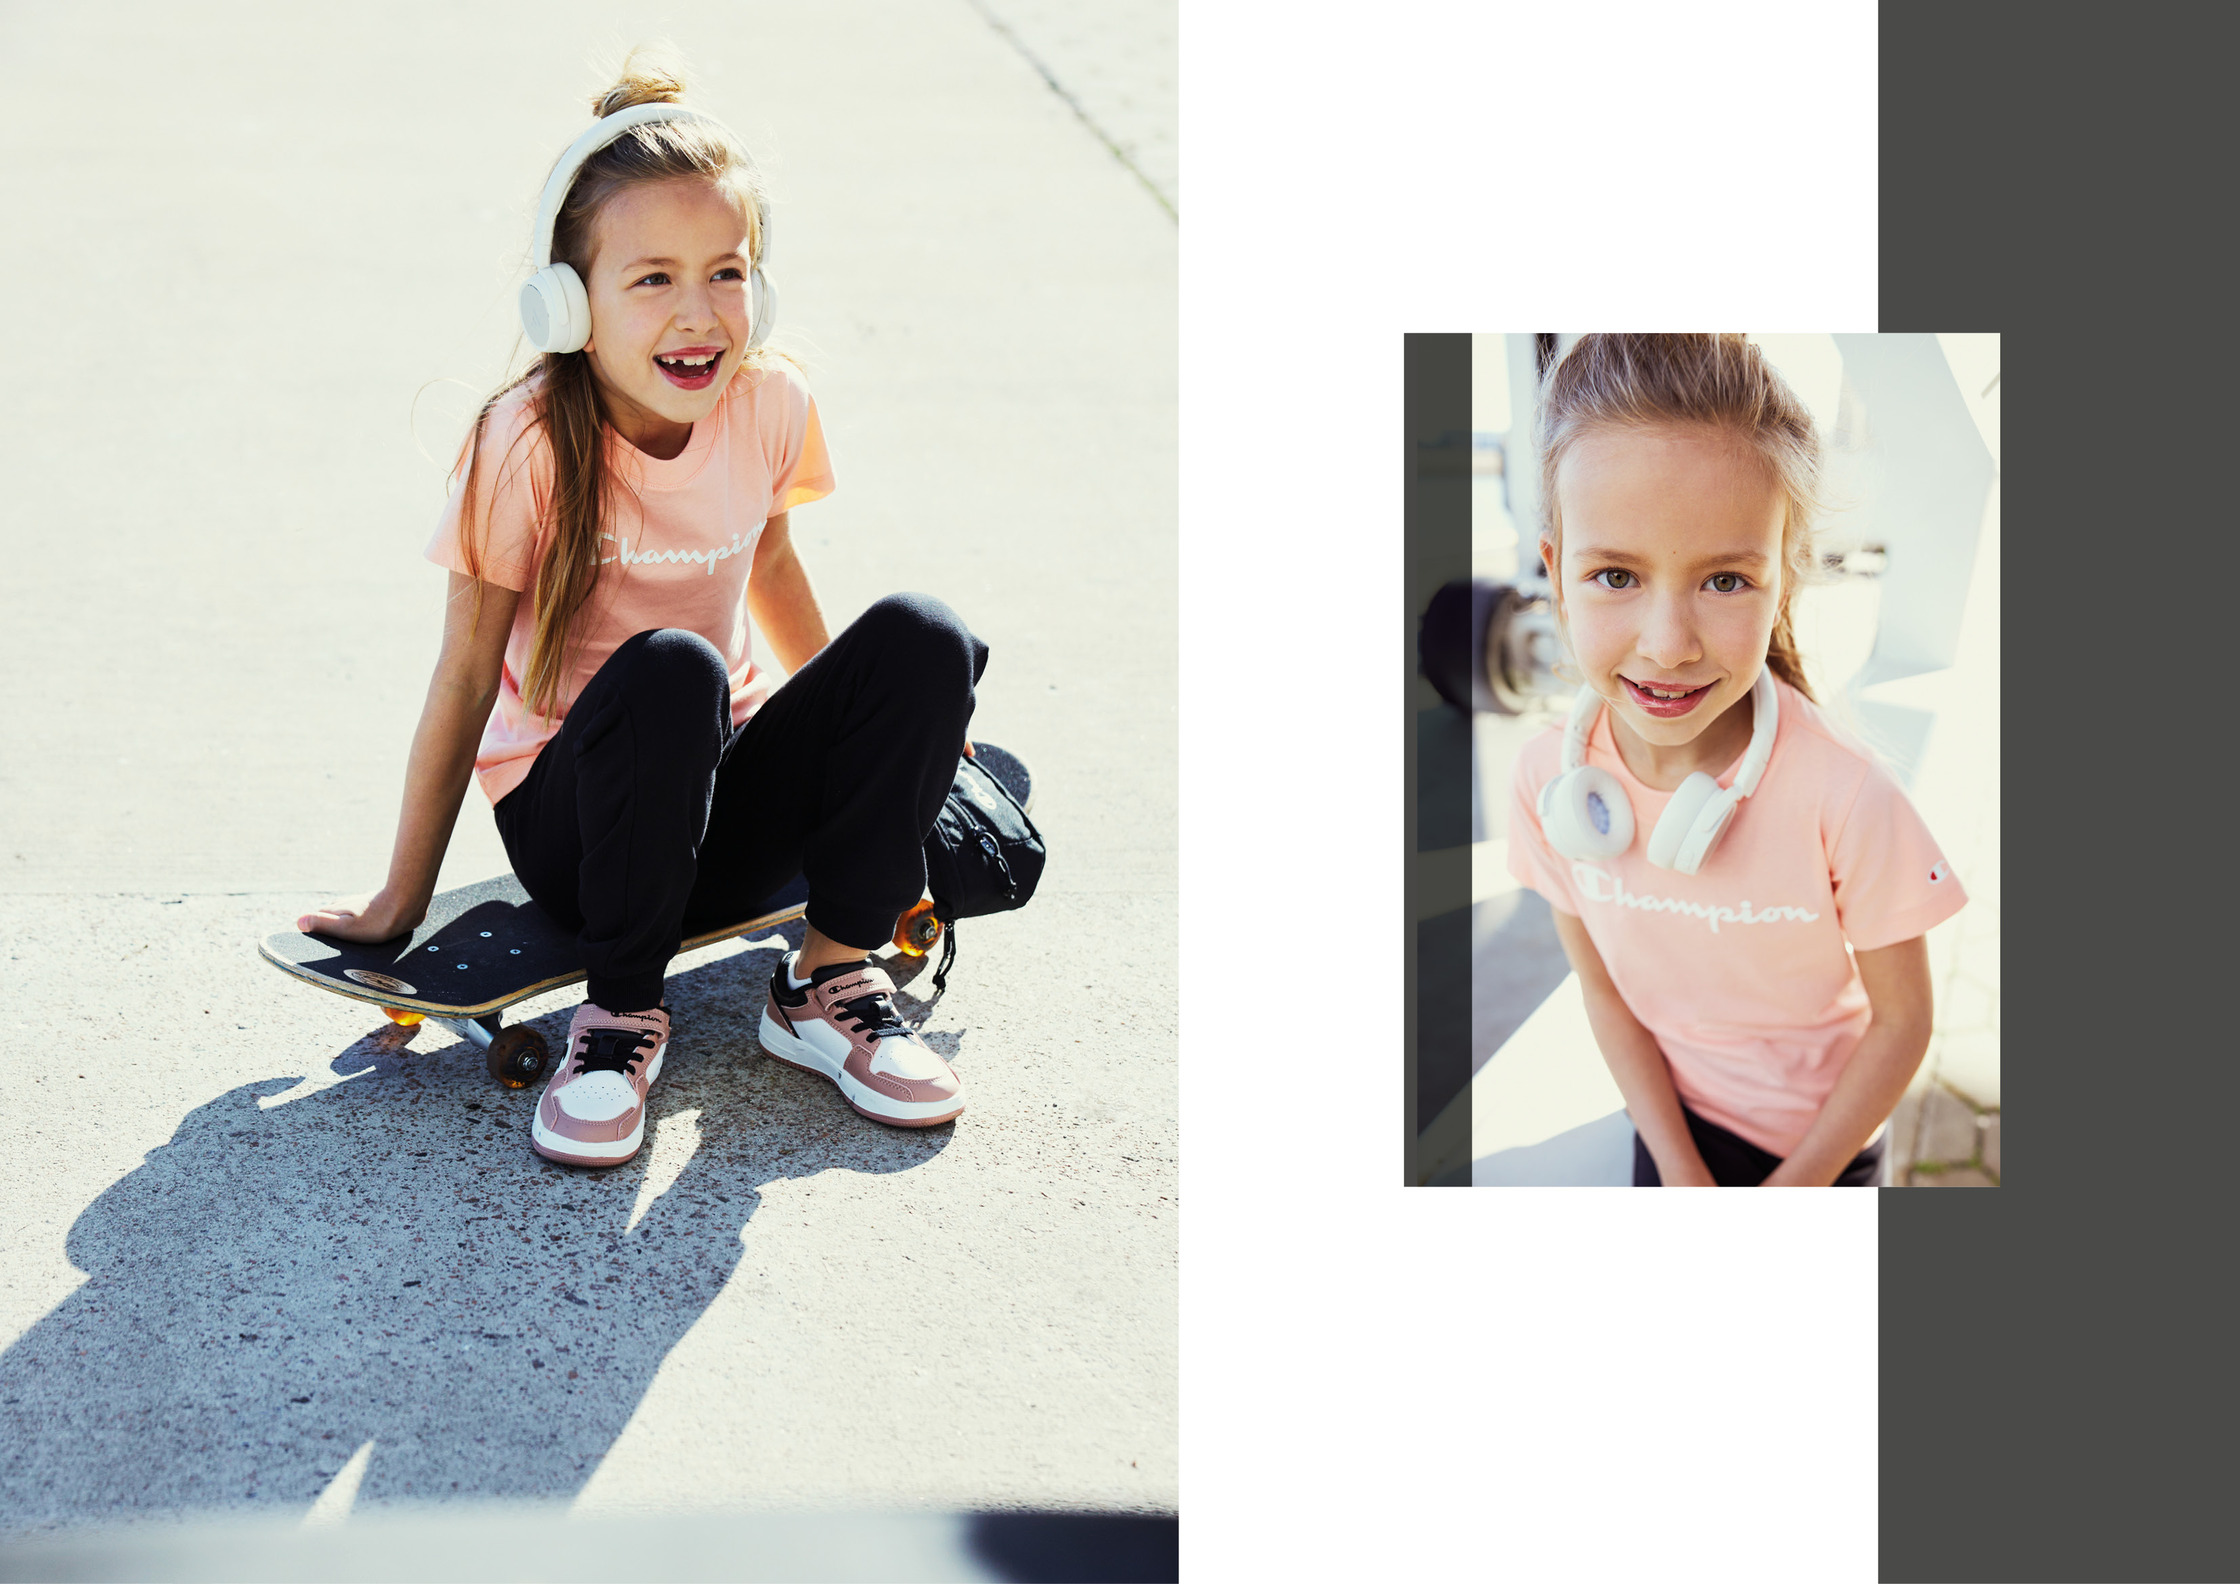 two pictures of a girl sitting on a skateboard